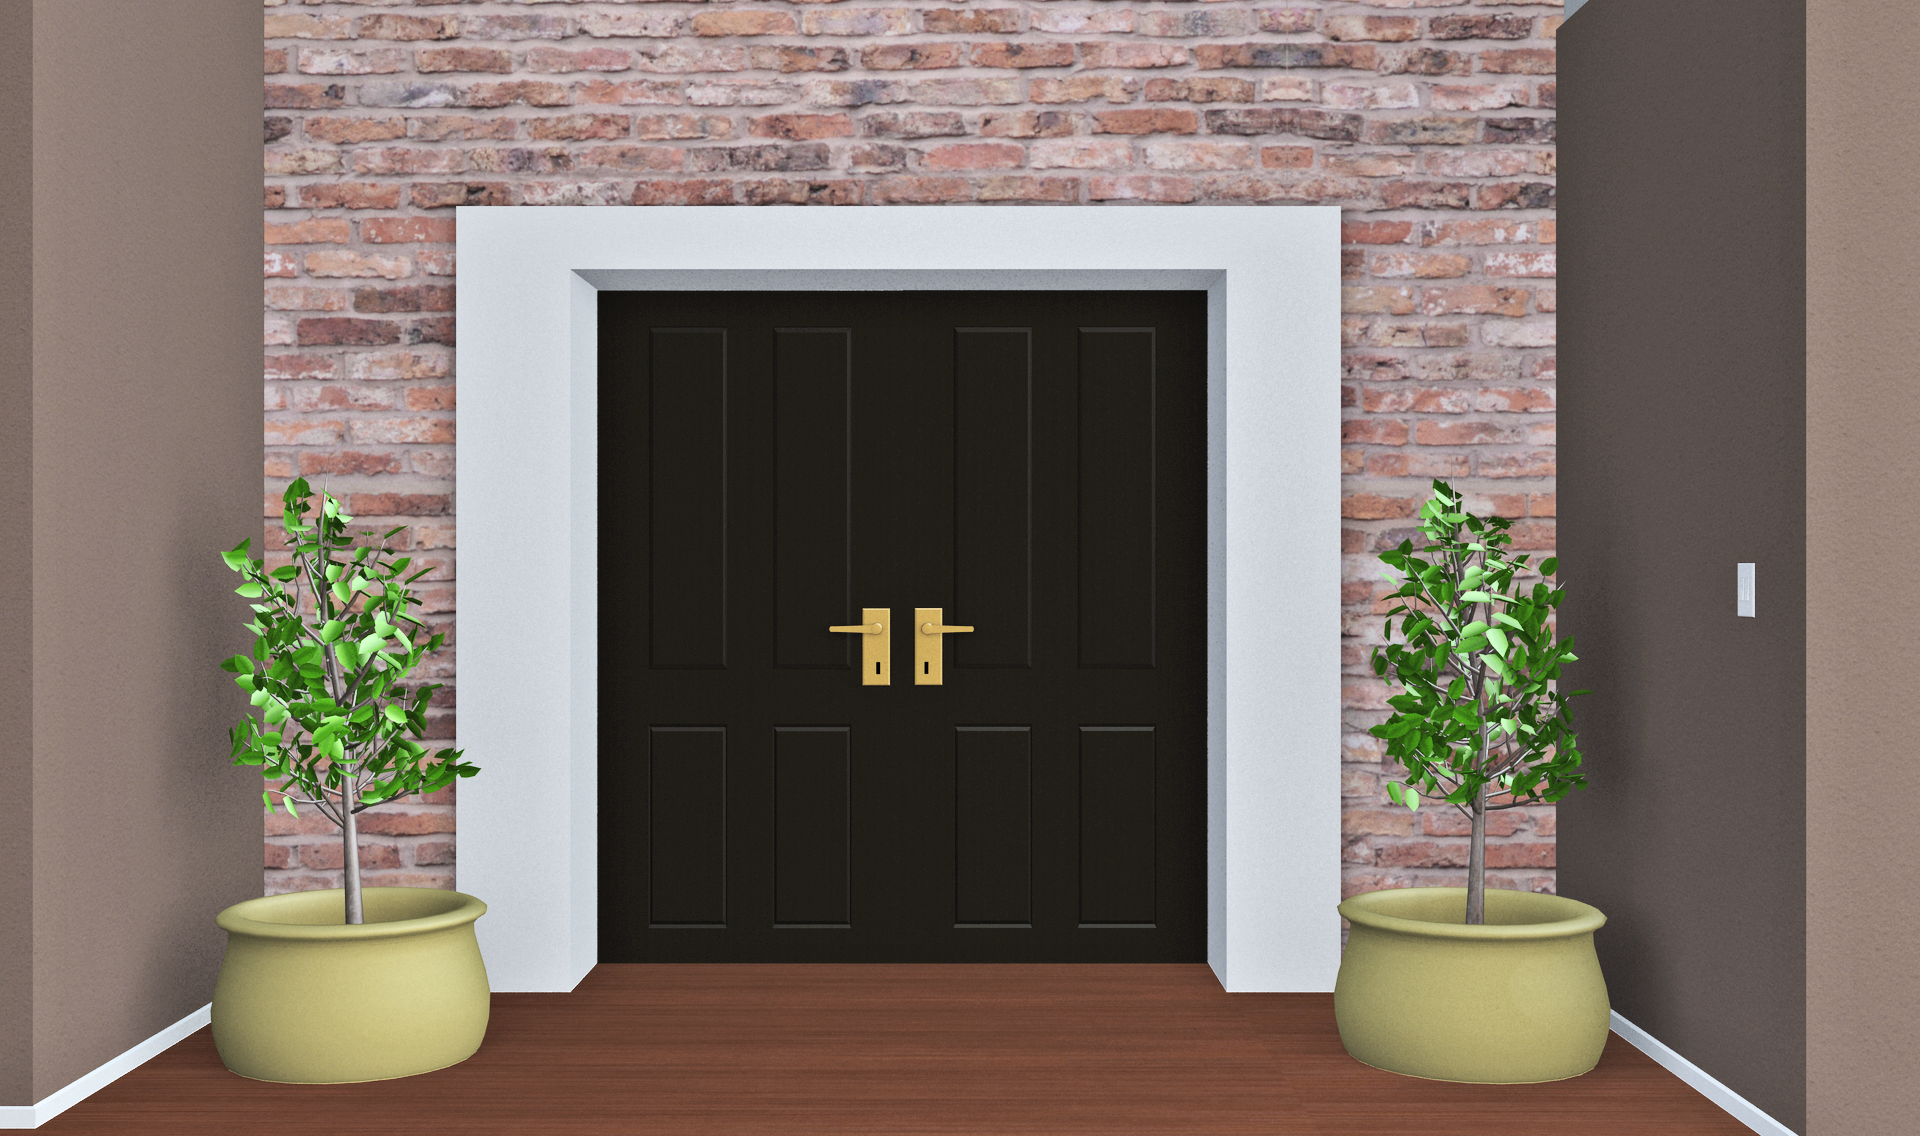 INT. MODERN HOME ENTRANCE 1 – DAY